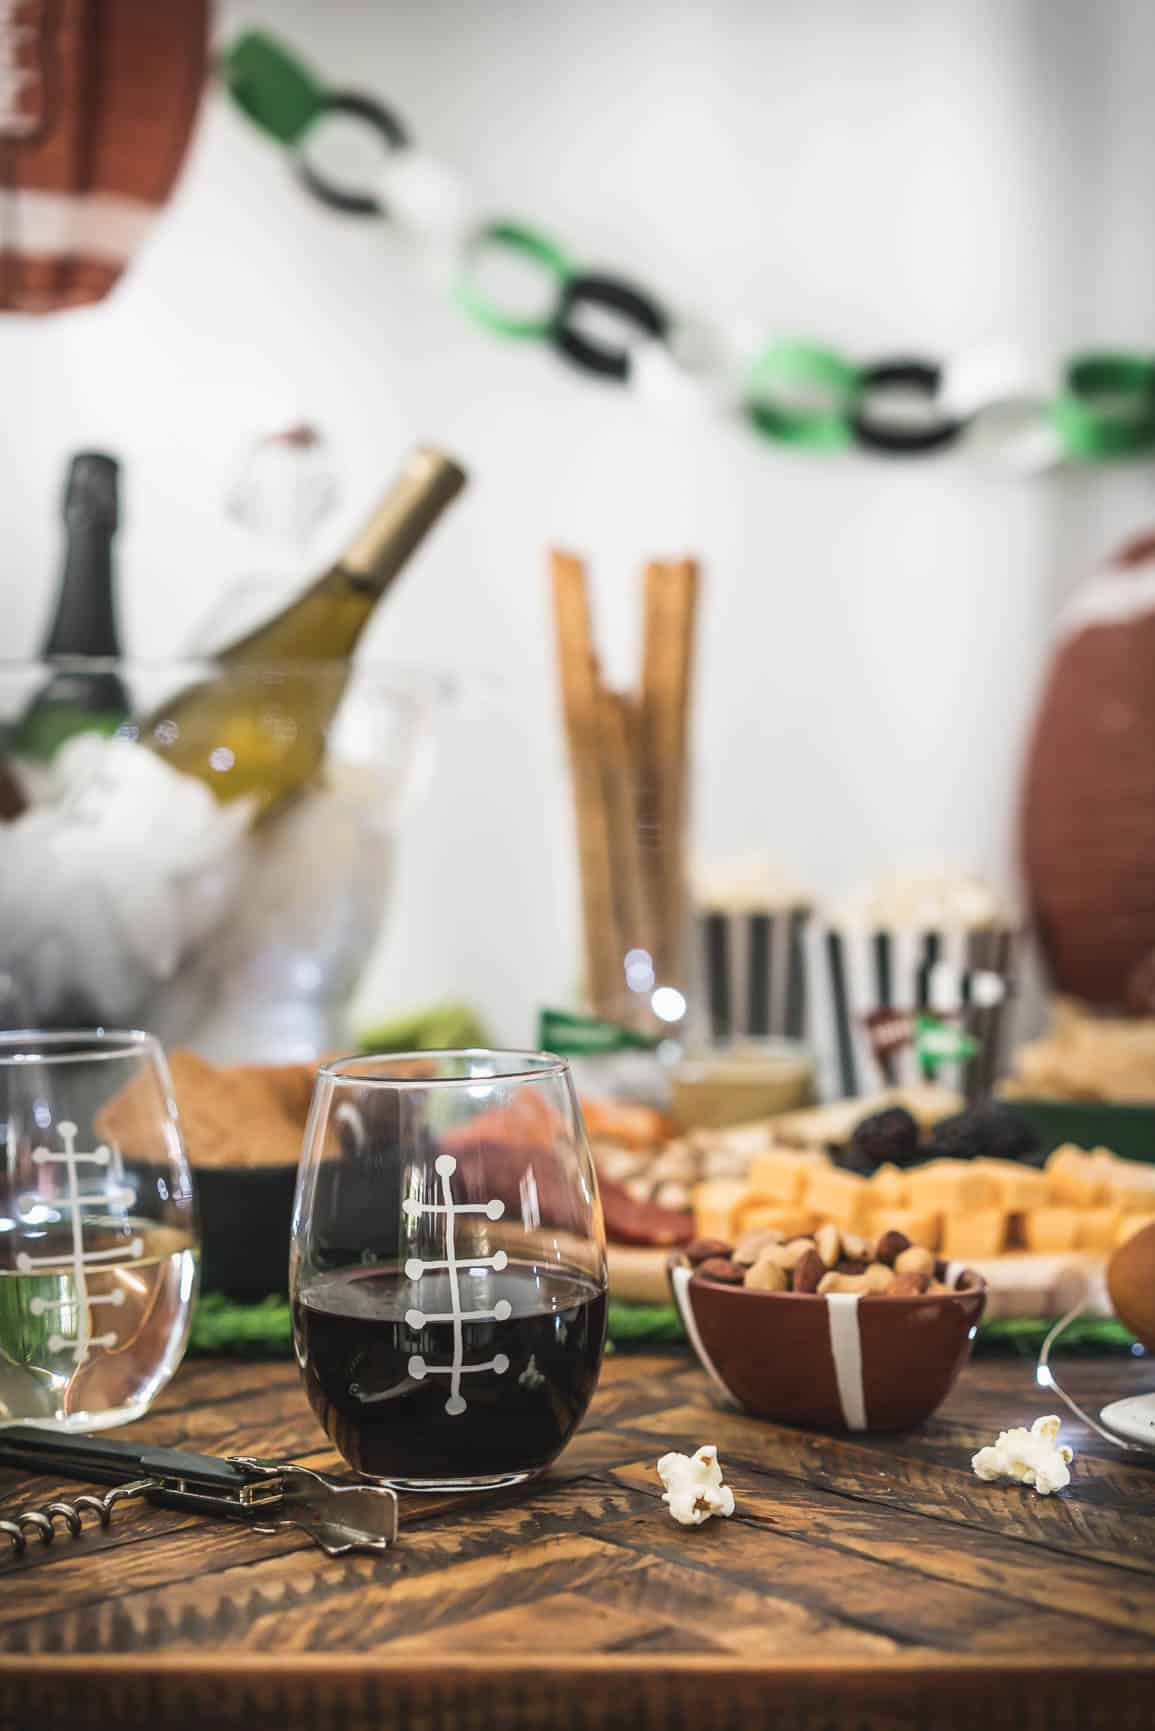 These tips are just for game day parties, they are the easiest way to make any gathering wine-friendly.